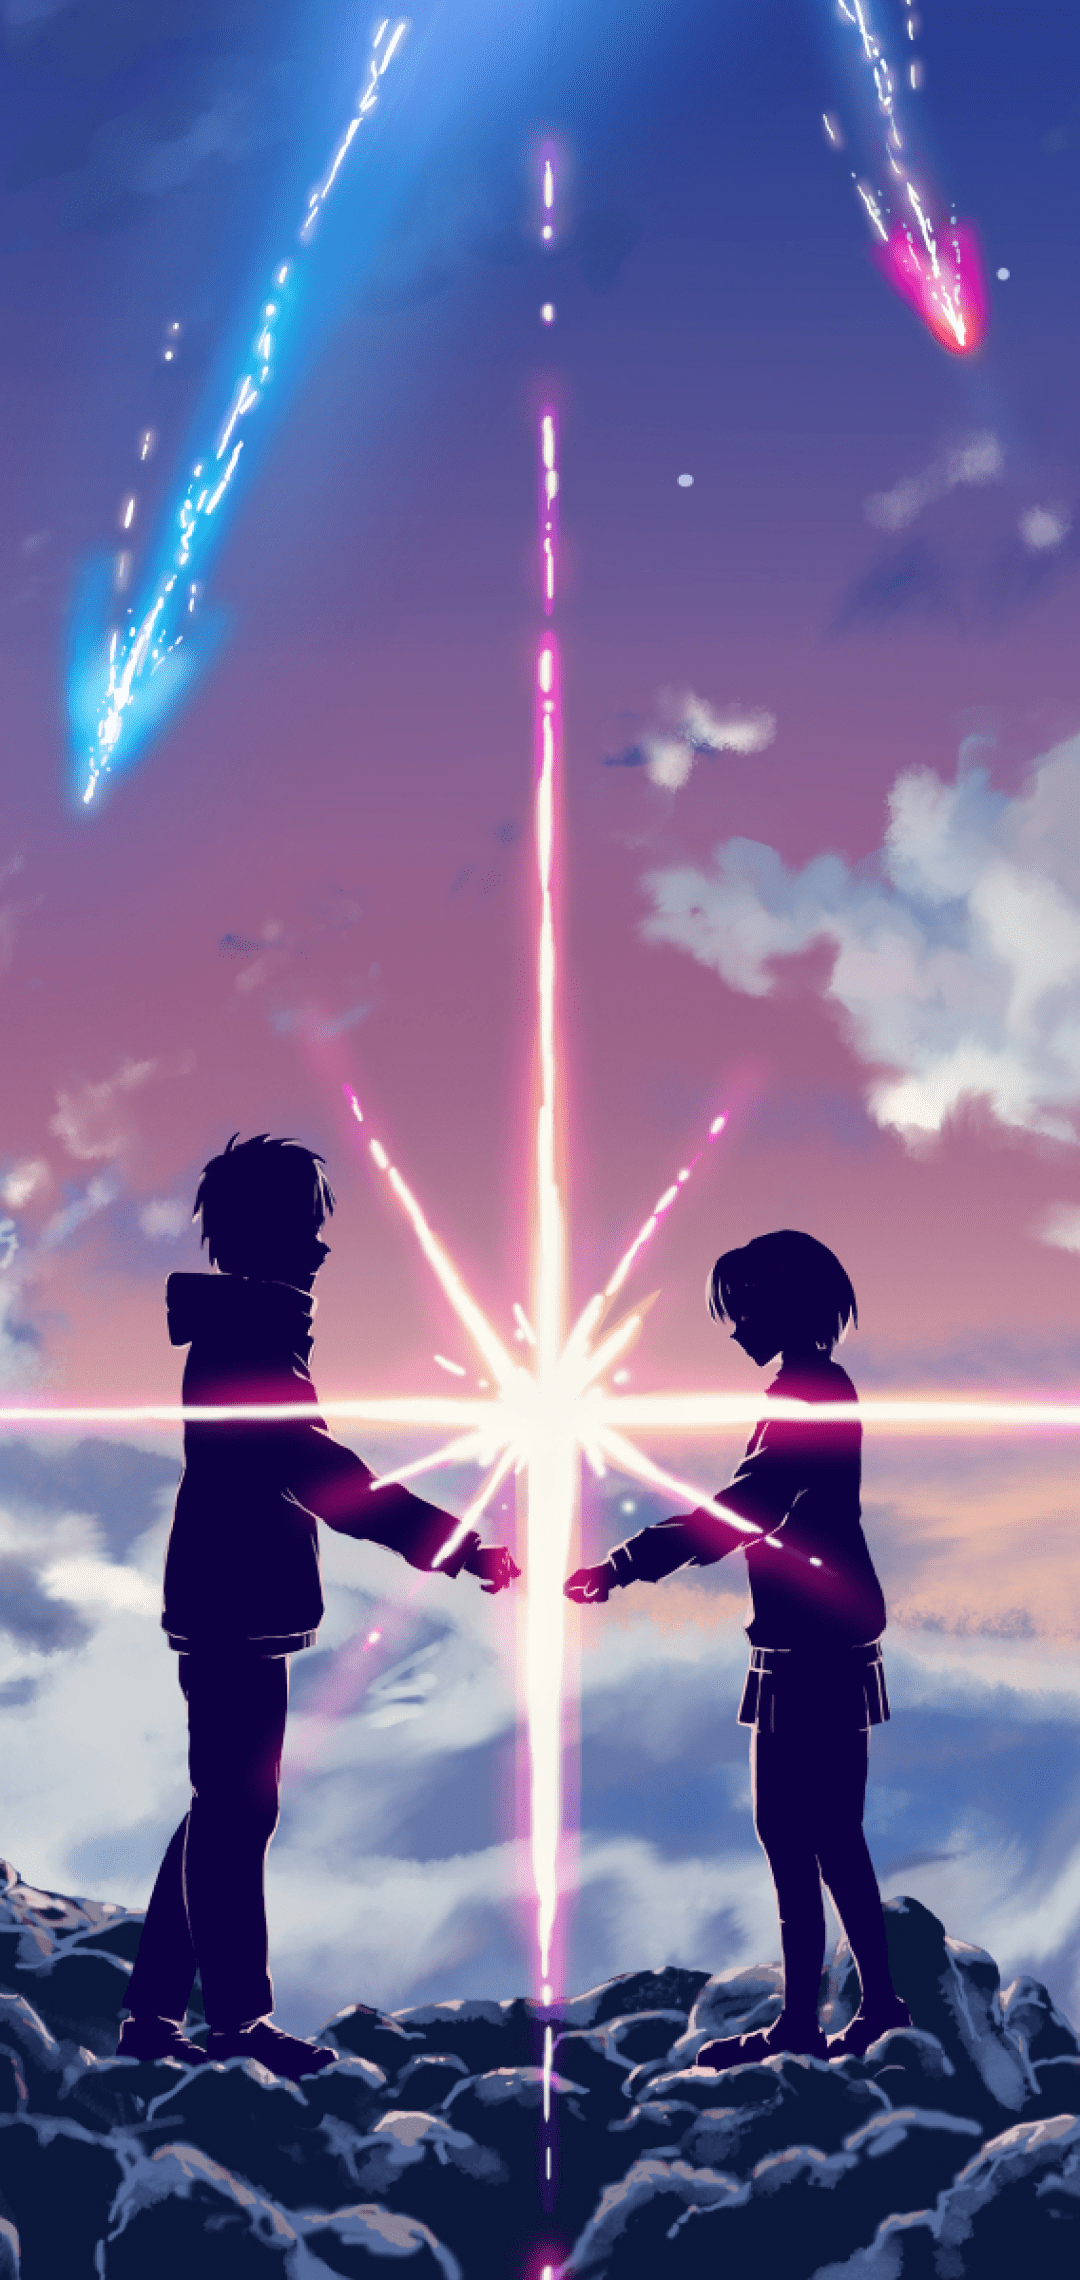 Your Name Wallpaper: Top Free Download [ HD ]